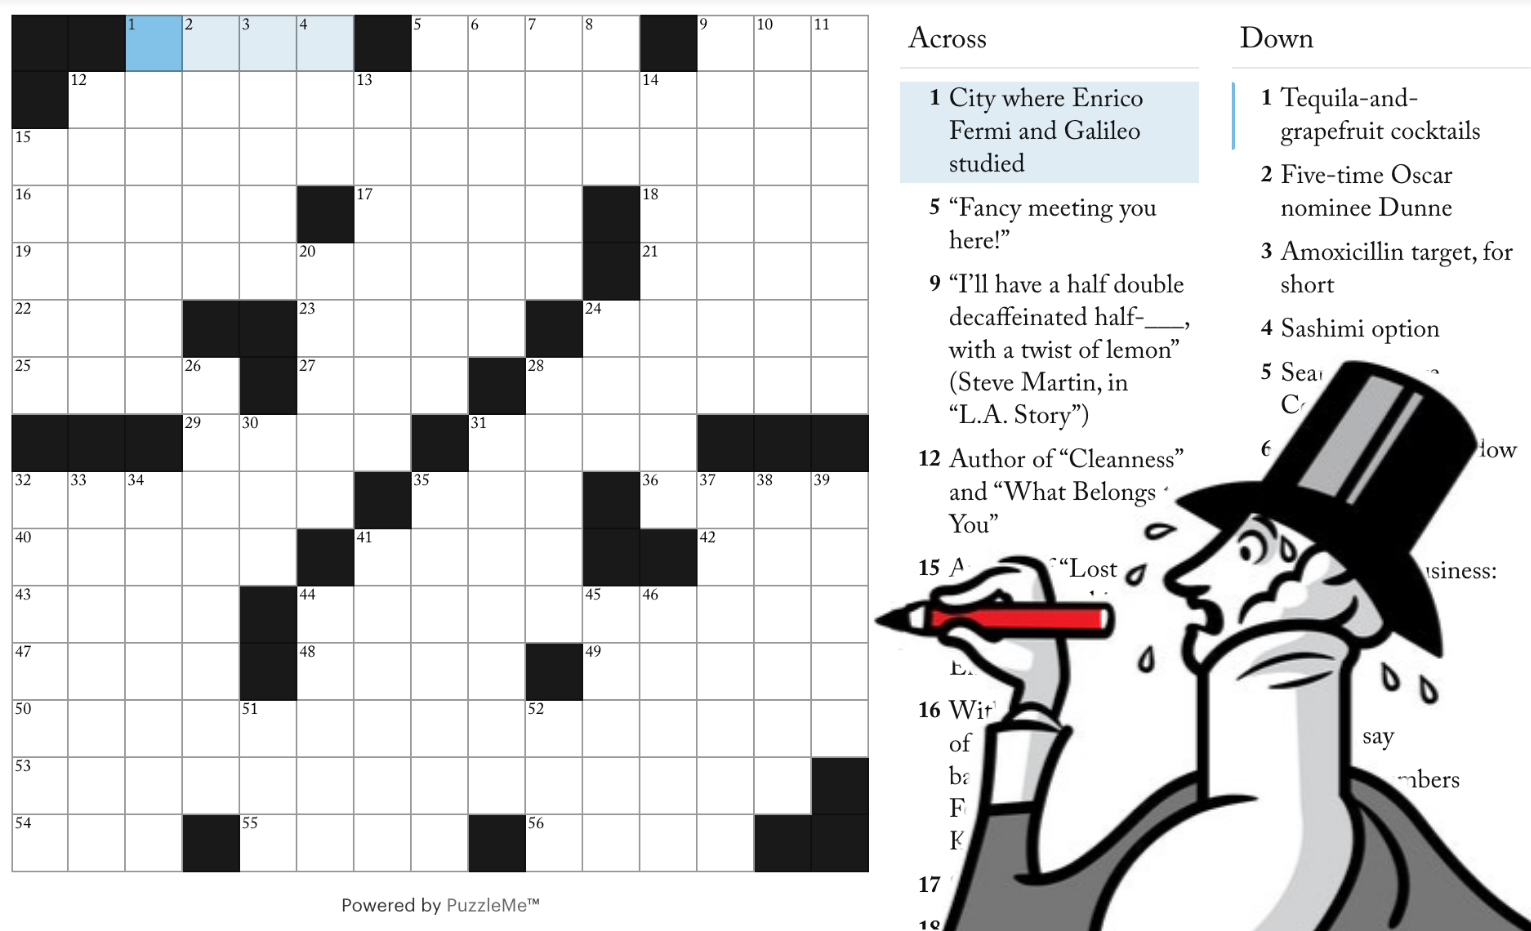 The New Yorker leans into crossword puzzles online and now in print